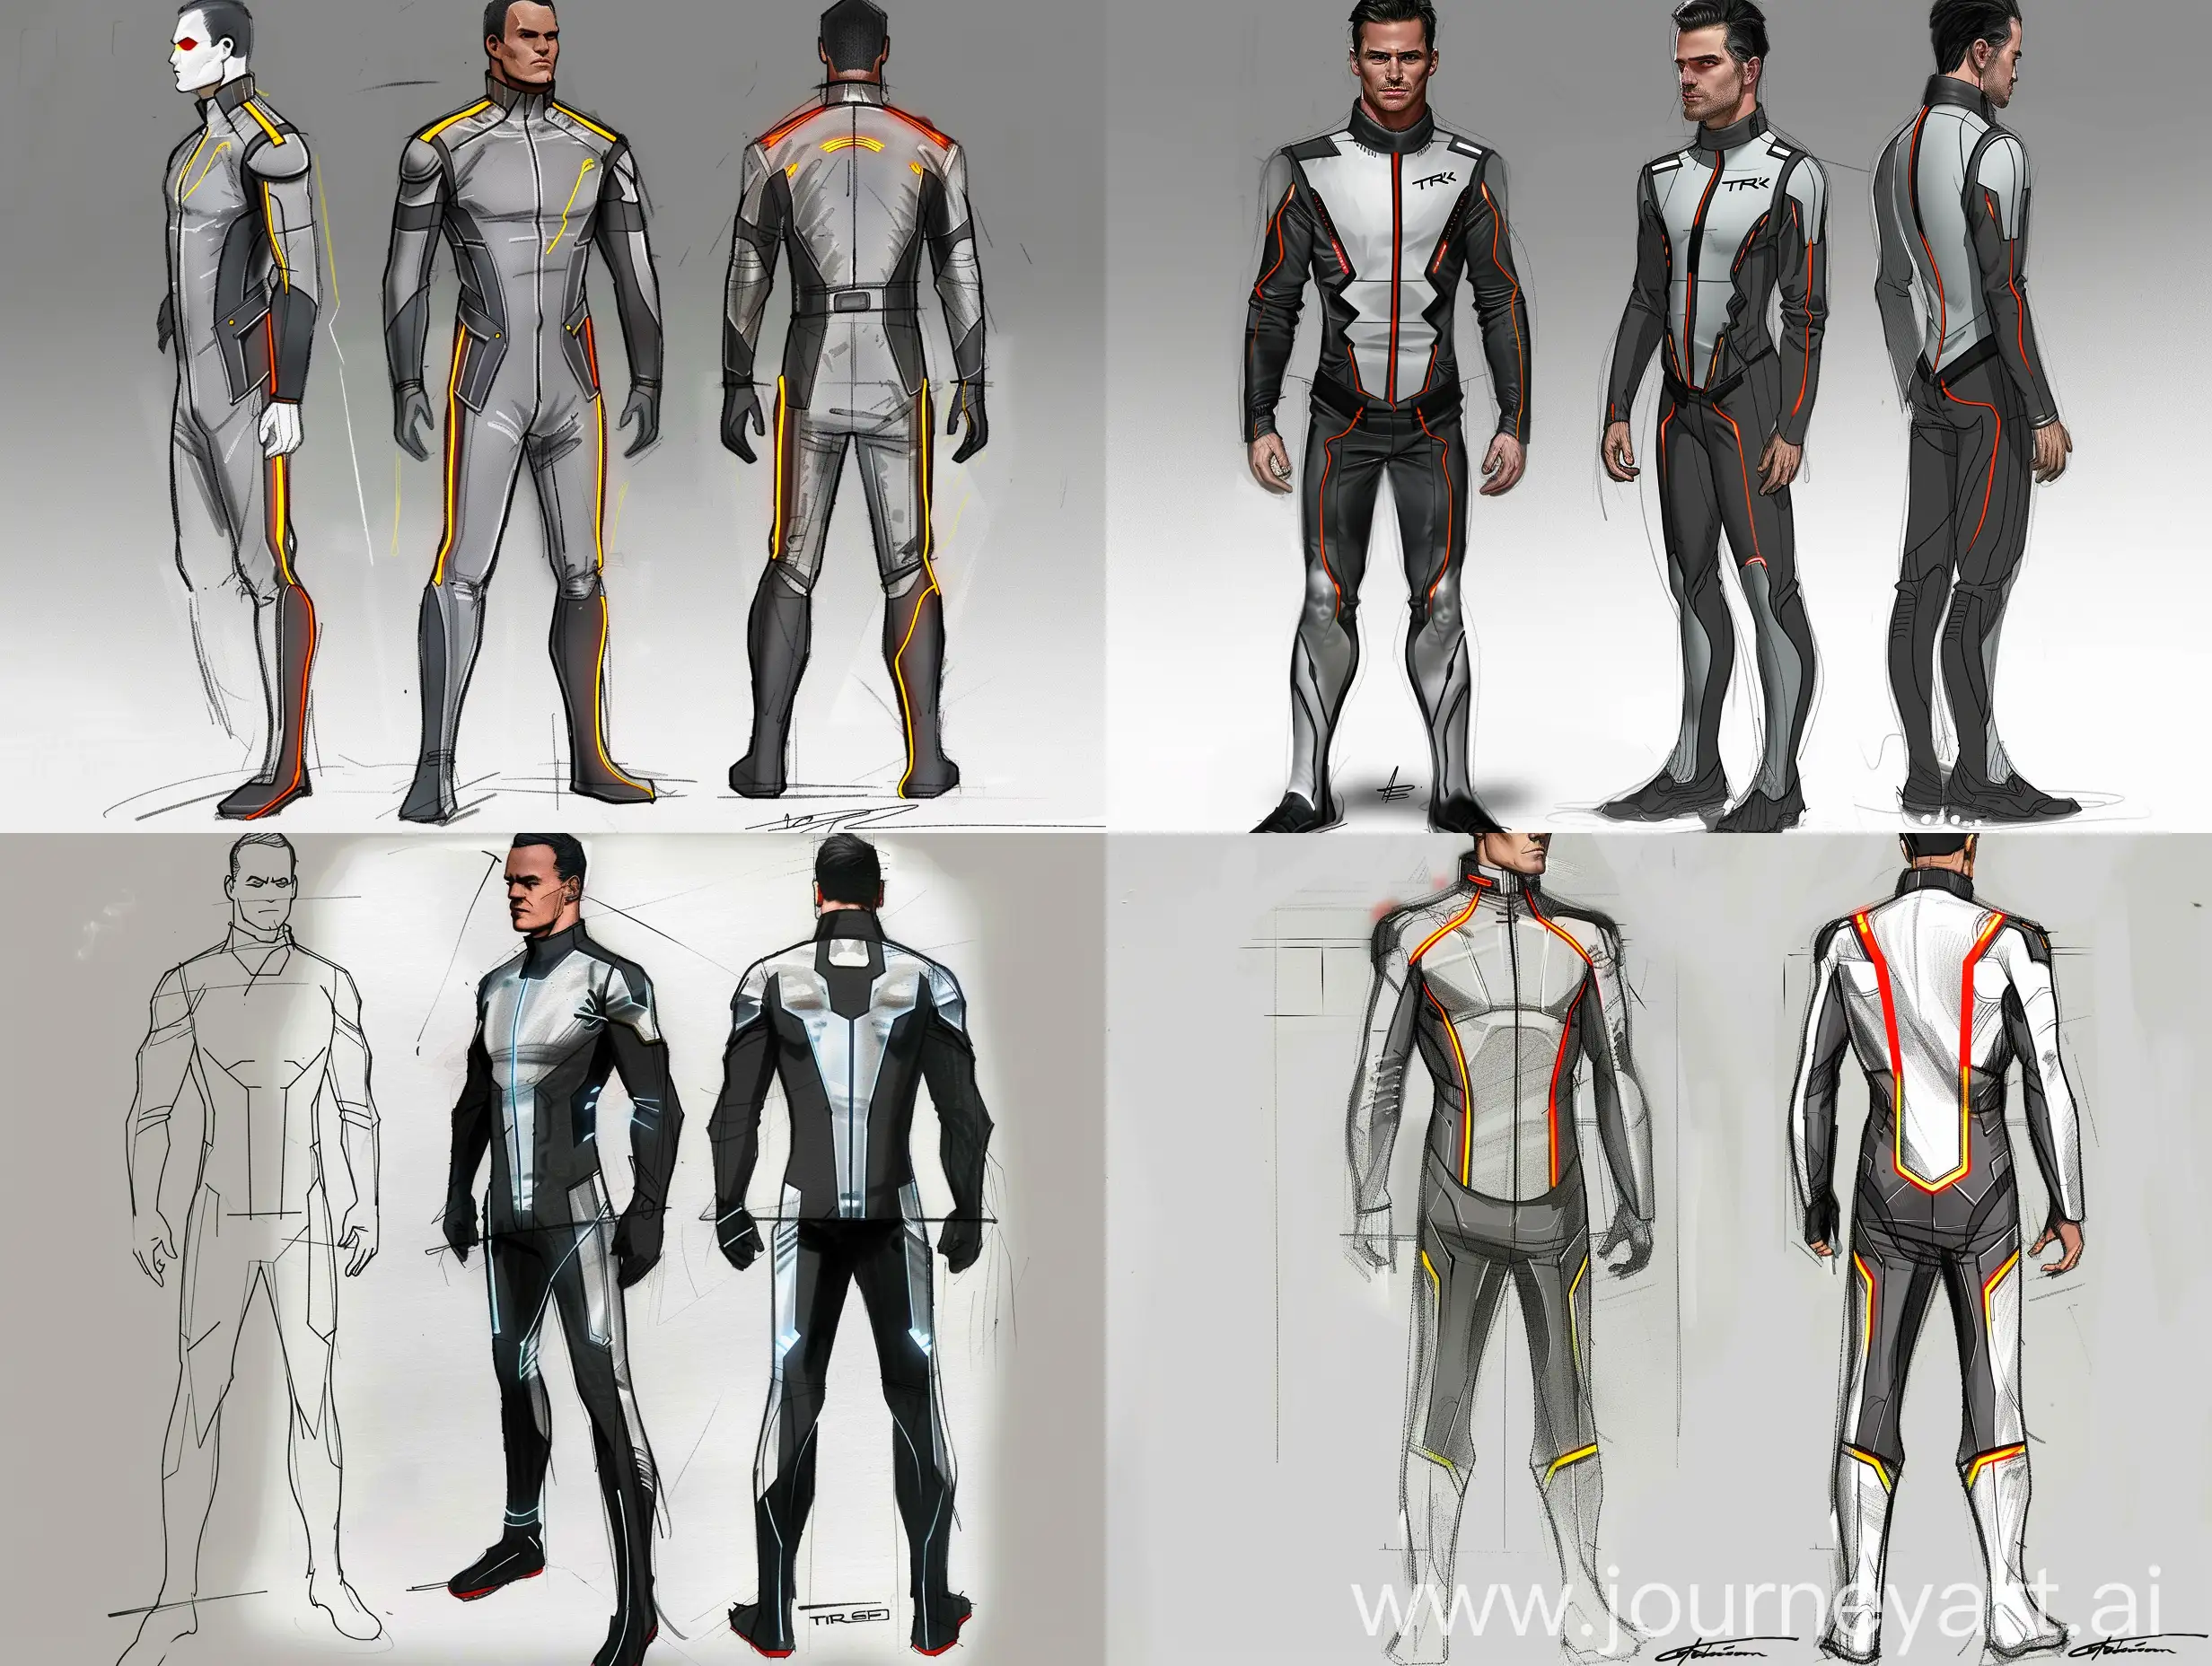 Men Fashion Sketch inspired by the film Tron
